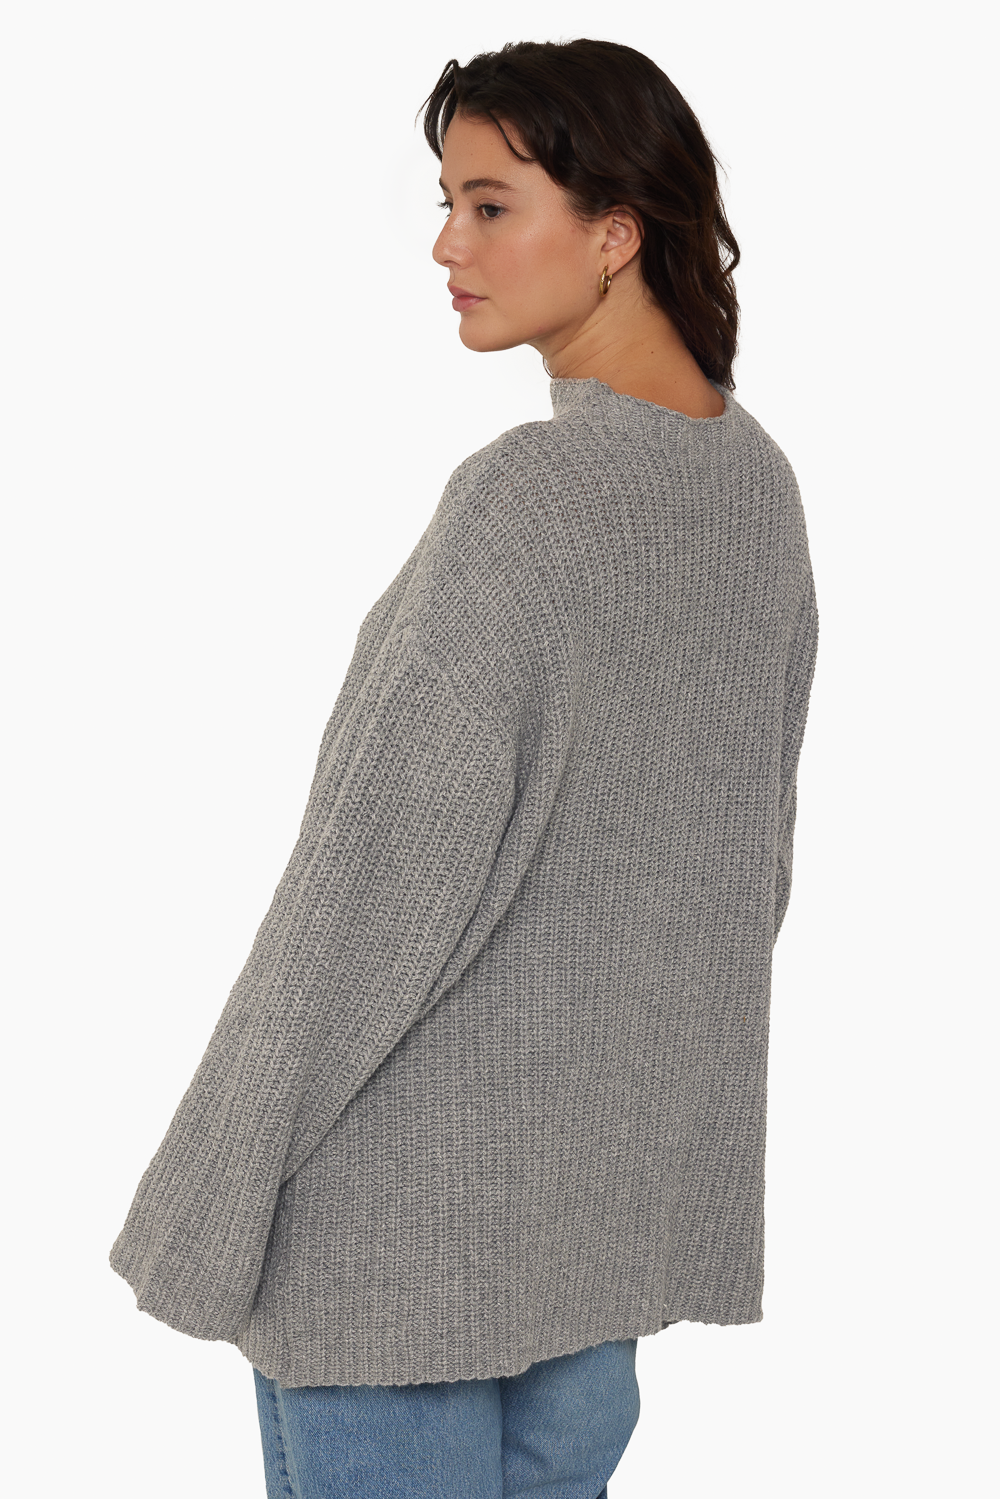 SET™ MOCK NECK SWEATER IN MARBLE